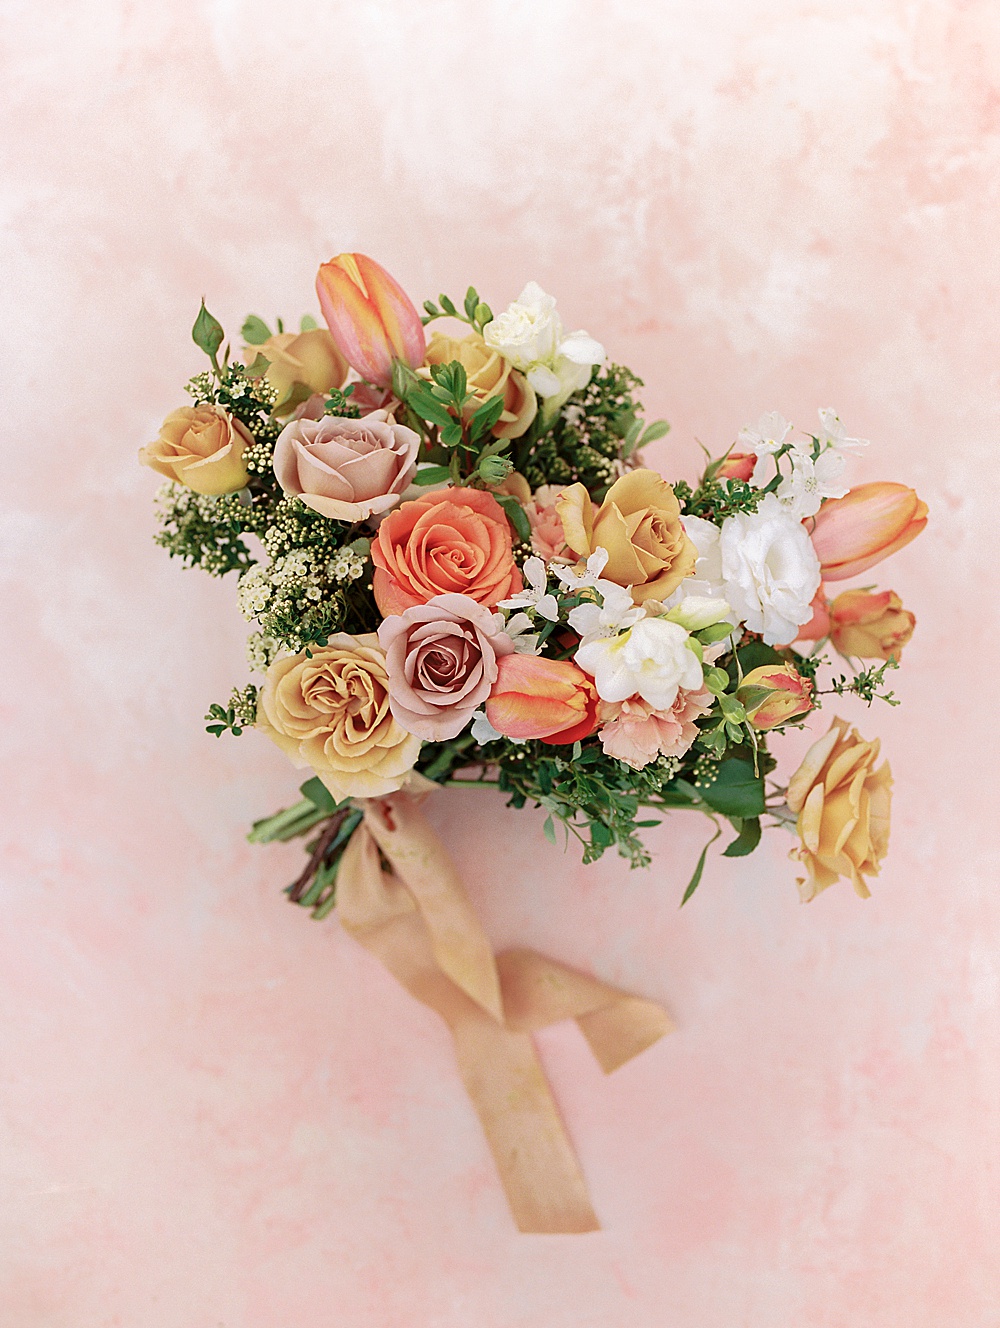 Wedding bouquet with pink, gold, white and orange